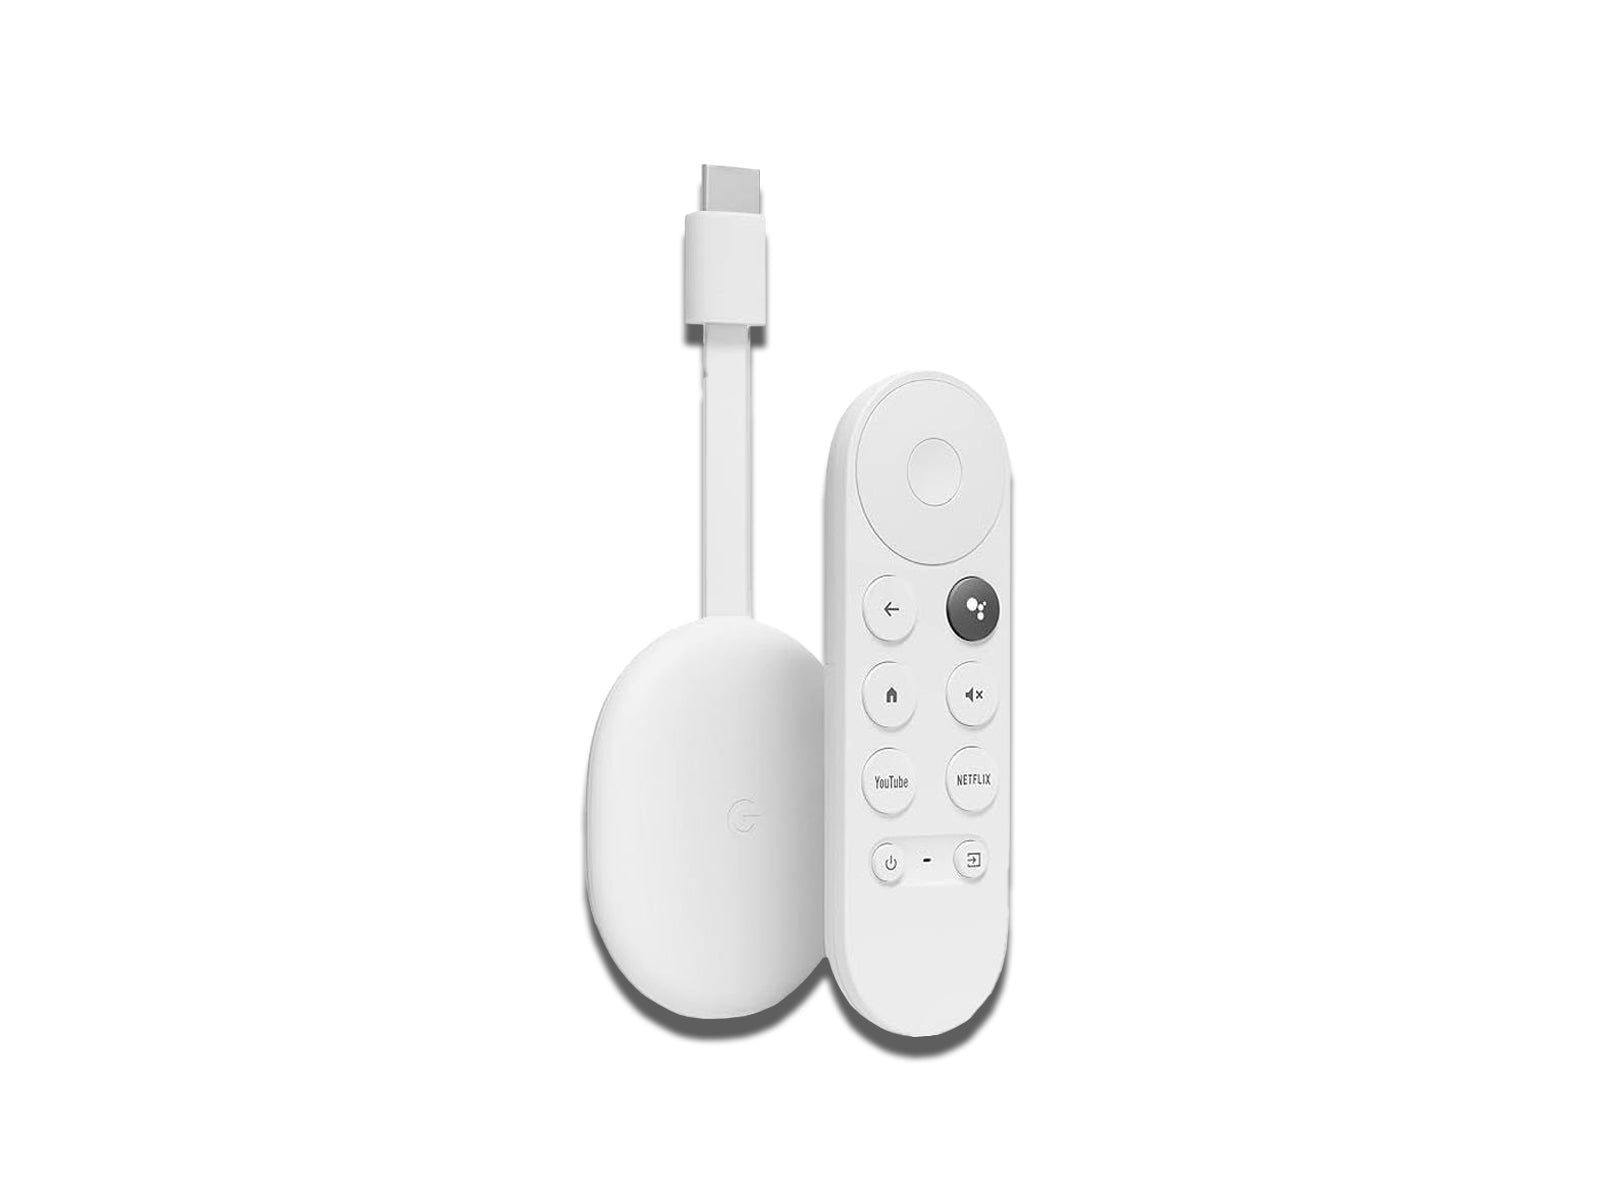 Left Side View of The Chromecast And Remote Control on The White Background